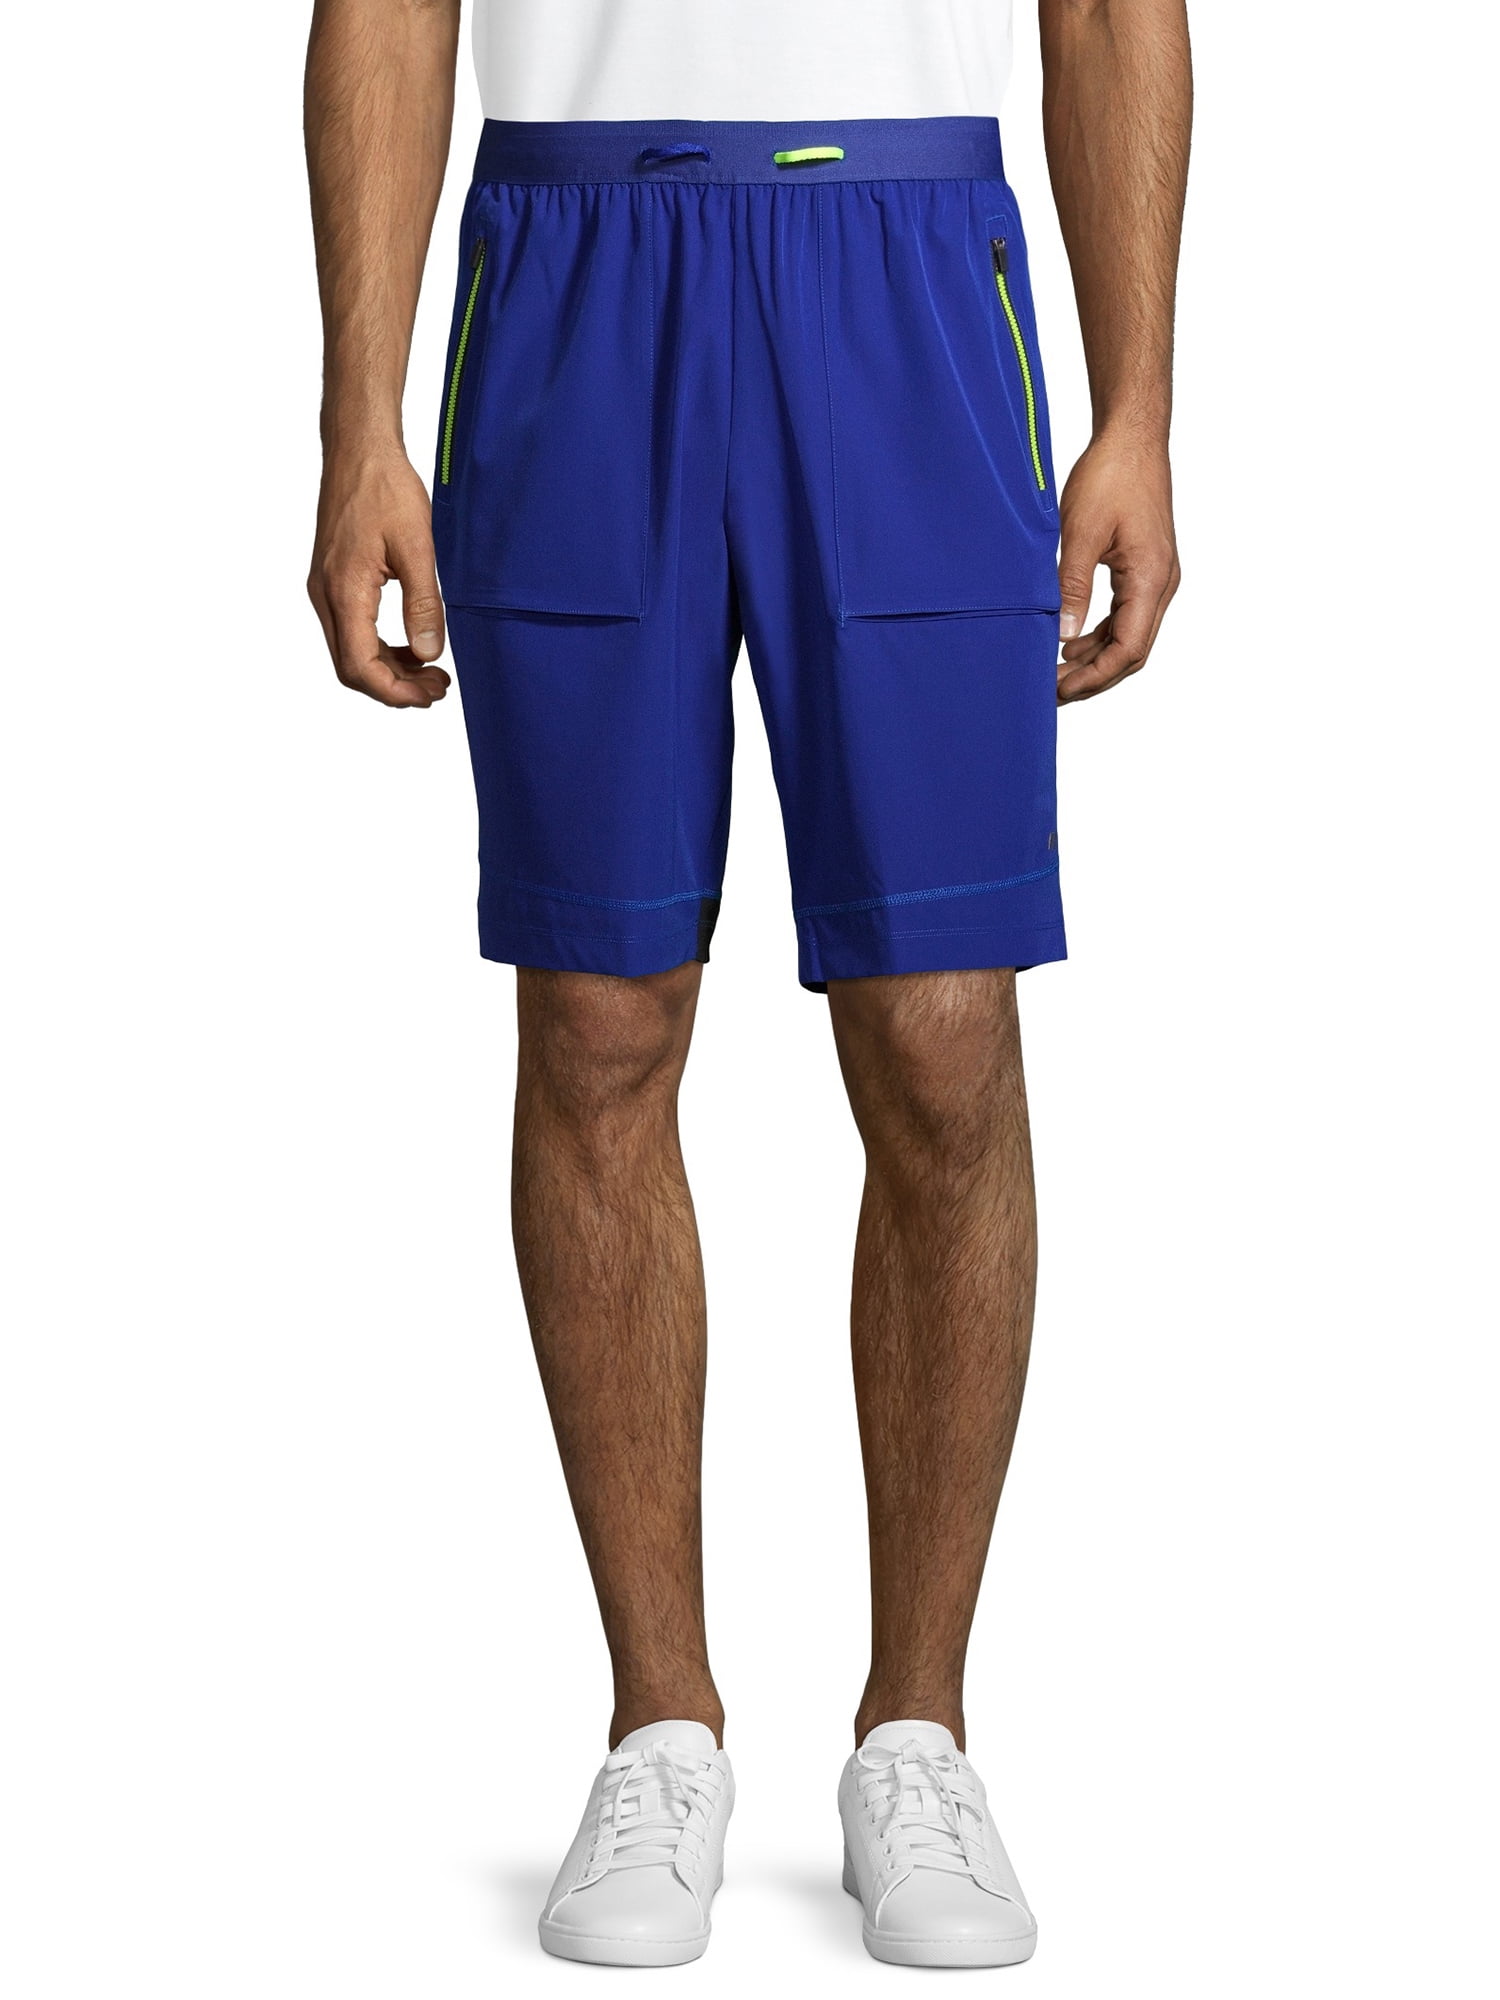 Russell Men's and Big Men's Active Stretch Woven Shorts, up to 5XL ...